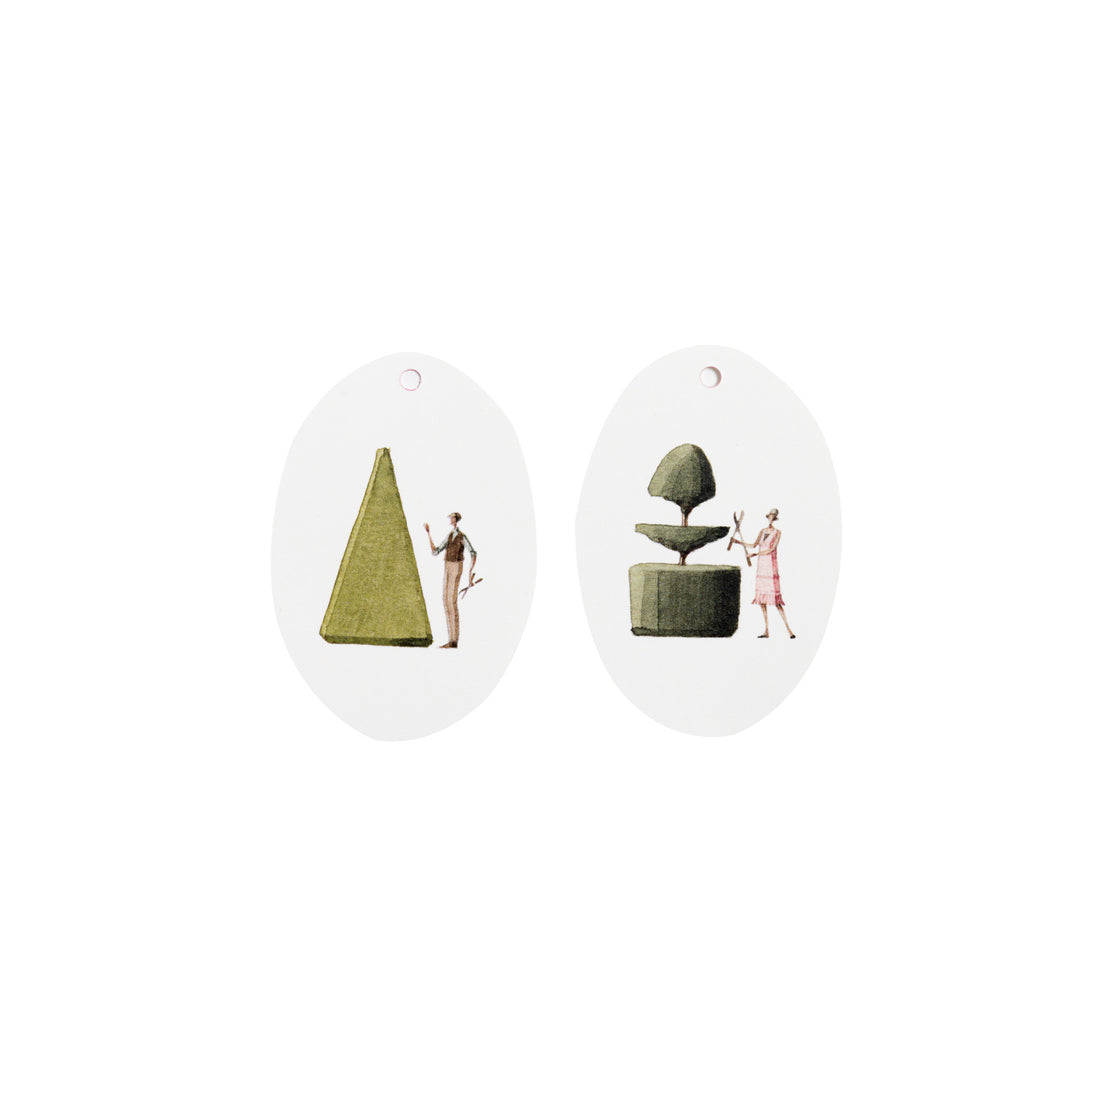 Two Top Topiary gift tags with illustrations of miniature people arranging stylized green trees, made in England by Hester &amp; Cook.